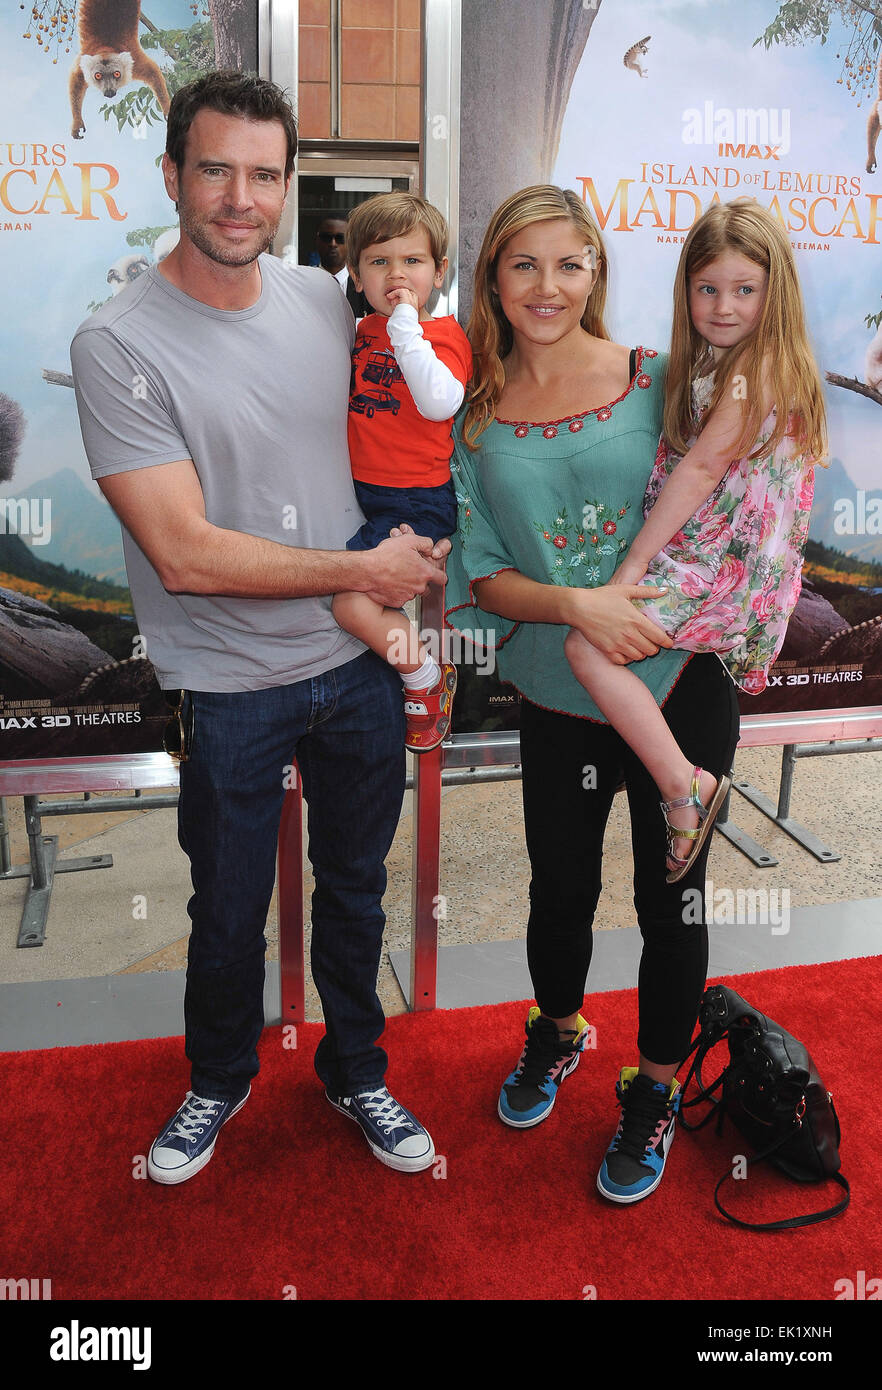 Los Angeles film premiere of 'Island Of Lemurs: Madagascar' held at California Science Center - Arrivals Featuring: Scott Foley,Marika Dominczyk,Marley Foley,Keller Foley Where: Los Angeles, California, United States When: 29 Mar 2014 Stock Photo